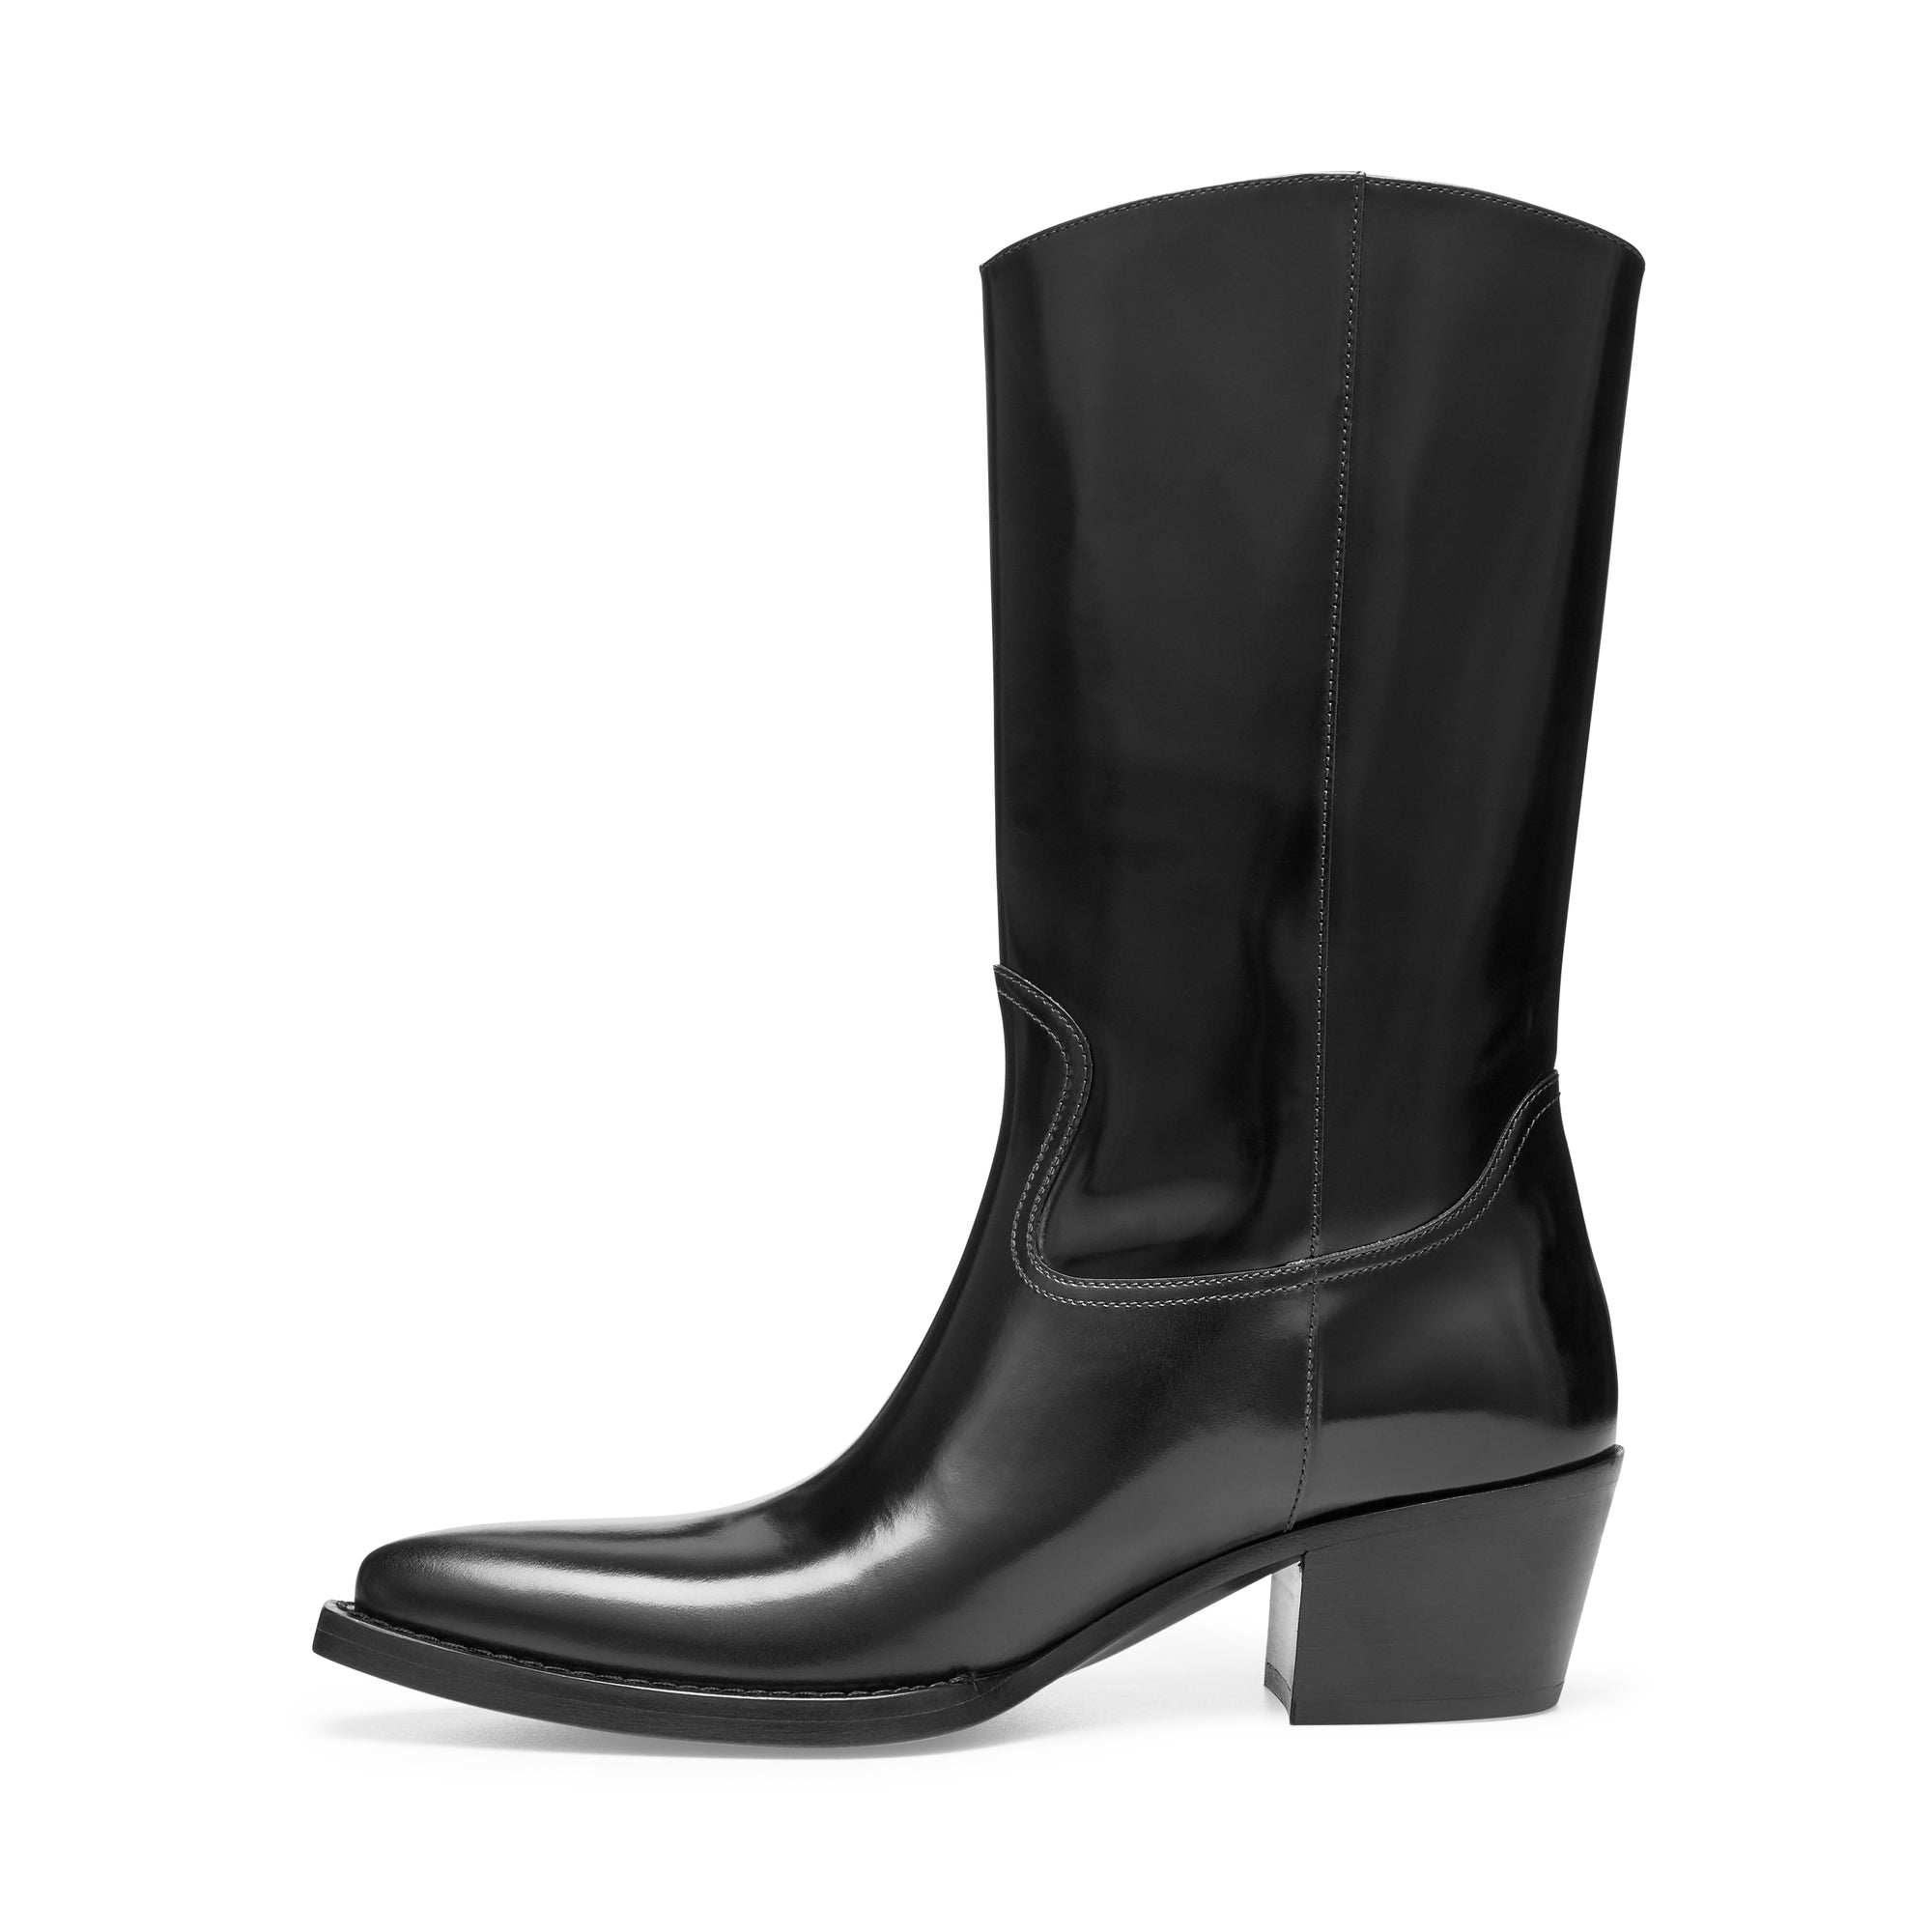 Prada - Women's Brushed Leather Camperos Boots - (Black) view 2